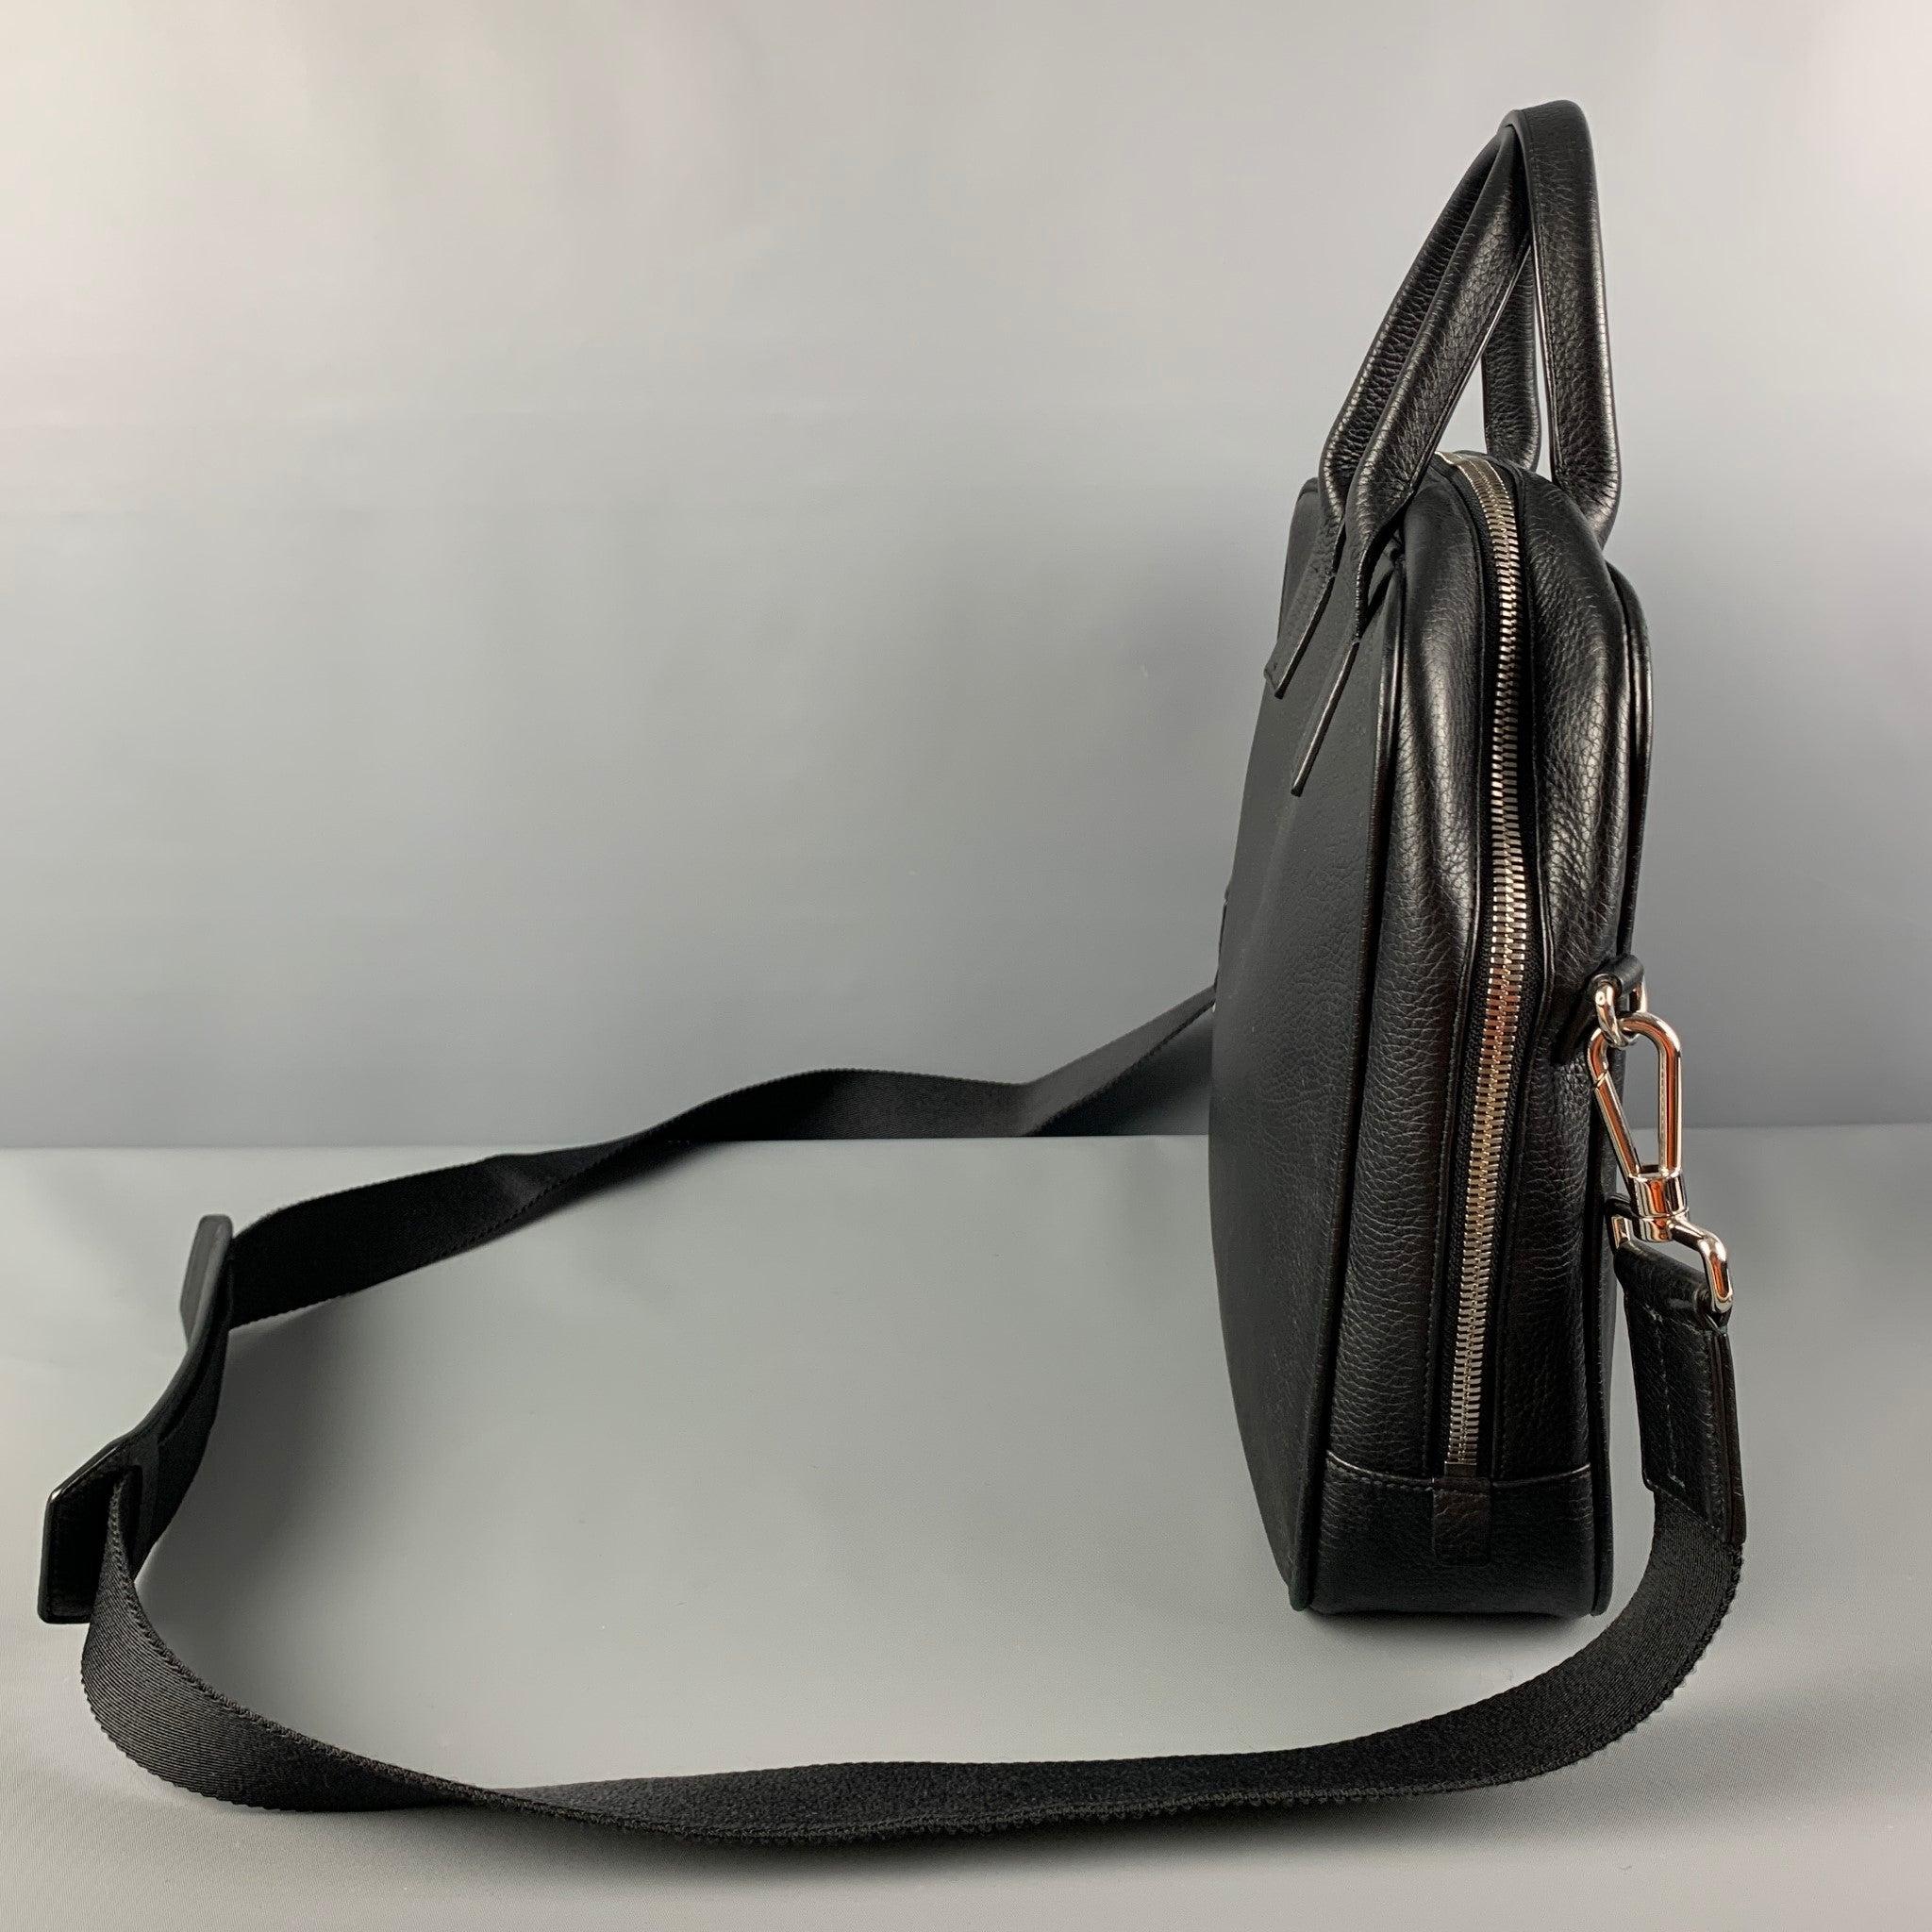 BALLY Black Leather Top Handles Shoulder Bag In Good Condition For Sale In San Francisco, CA